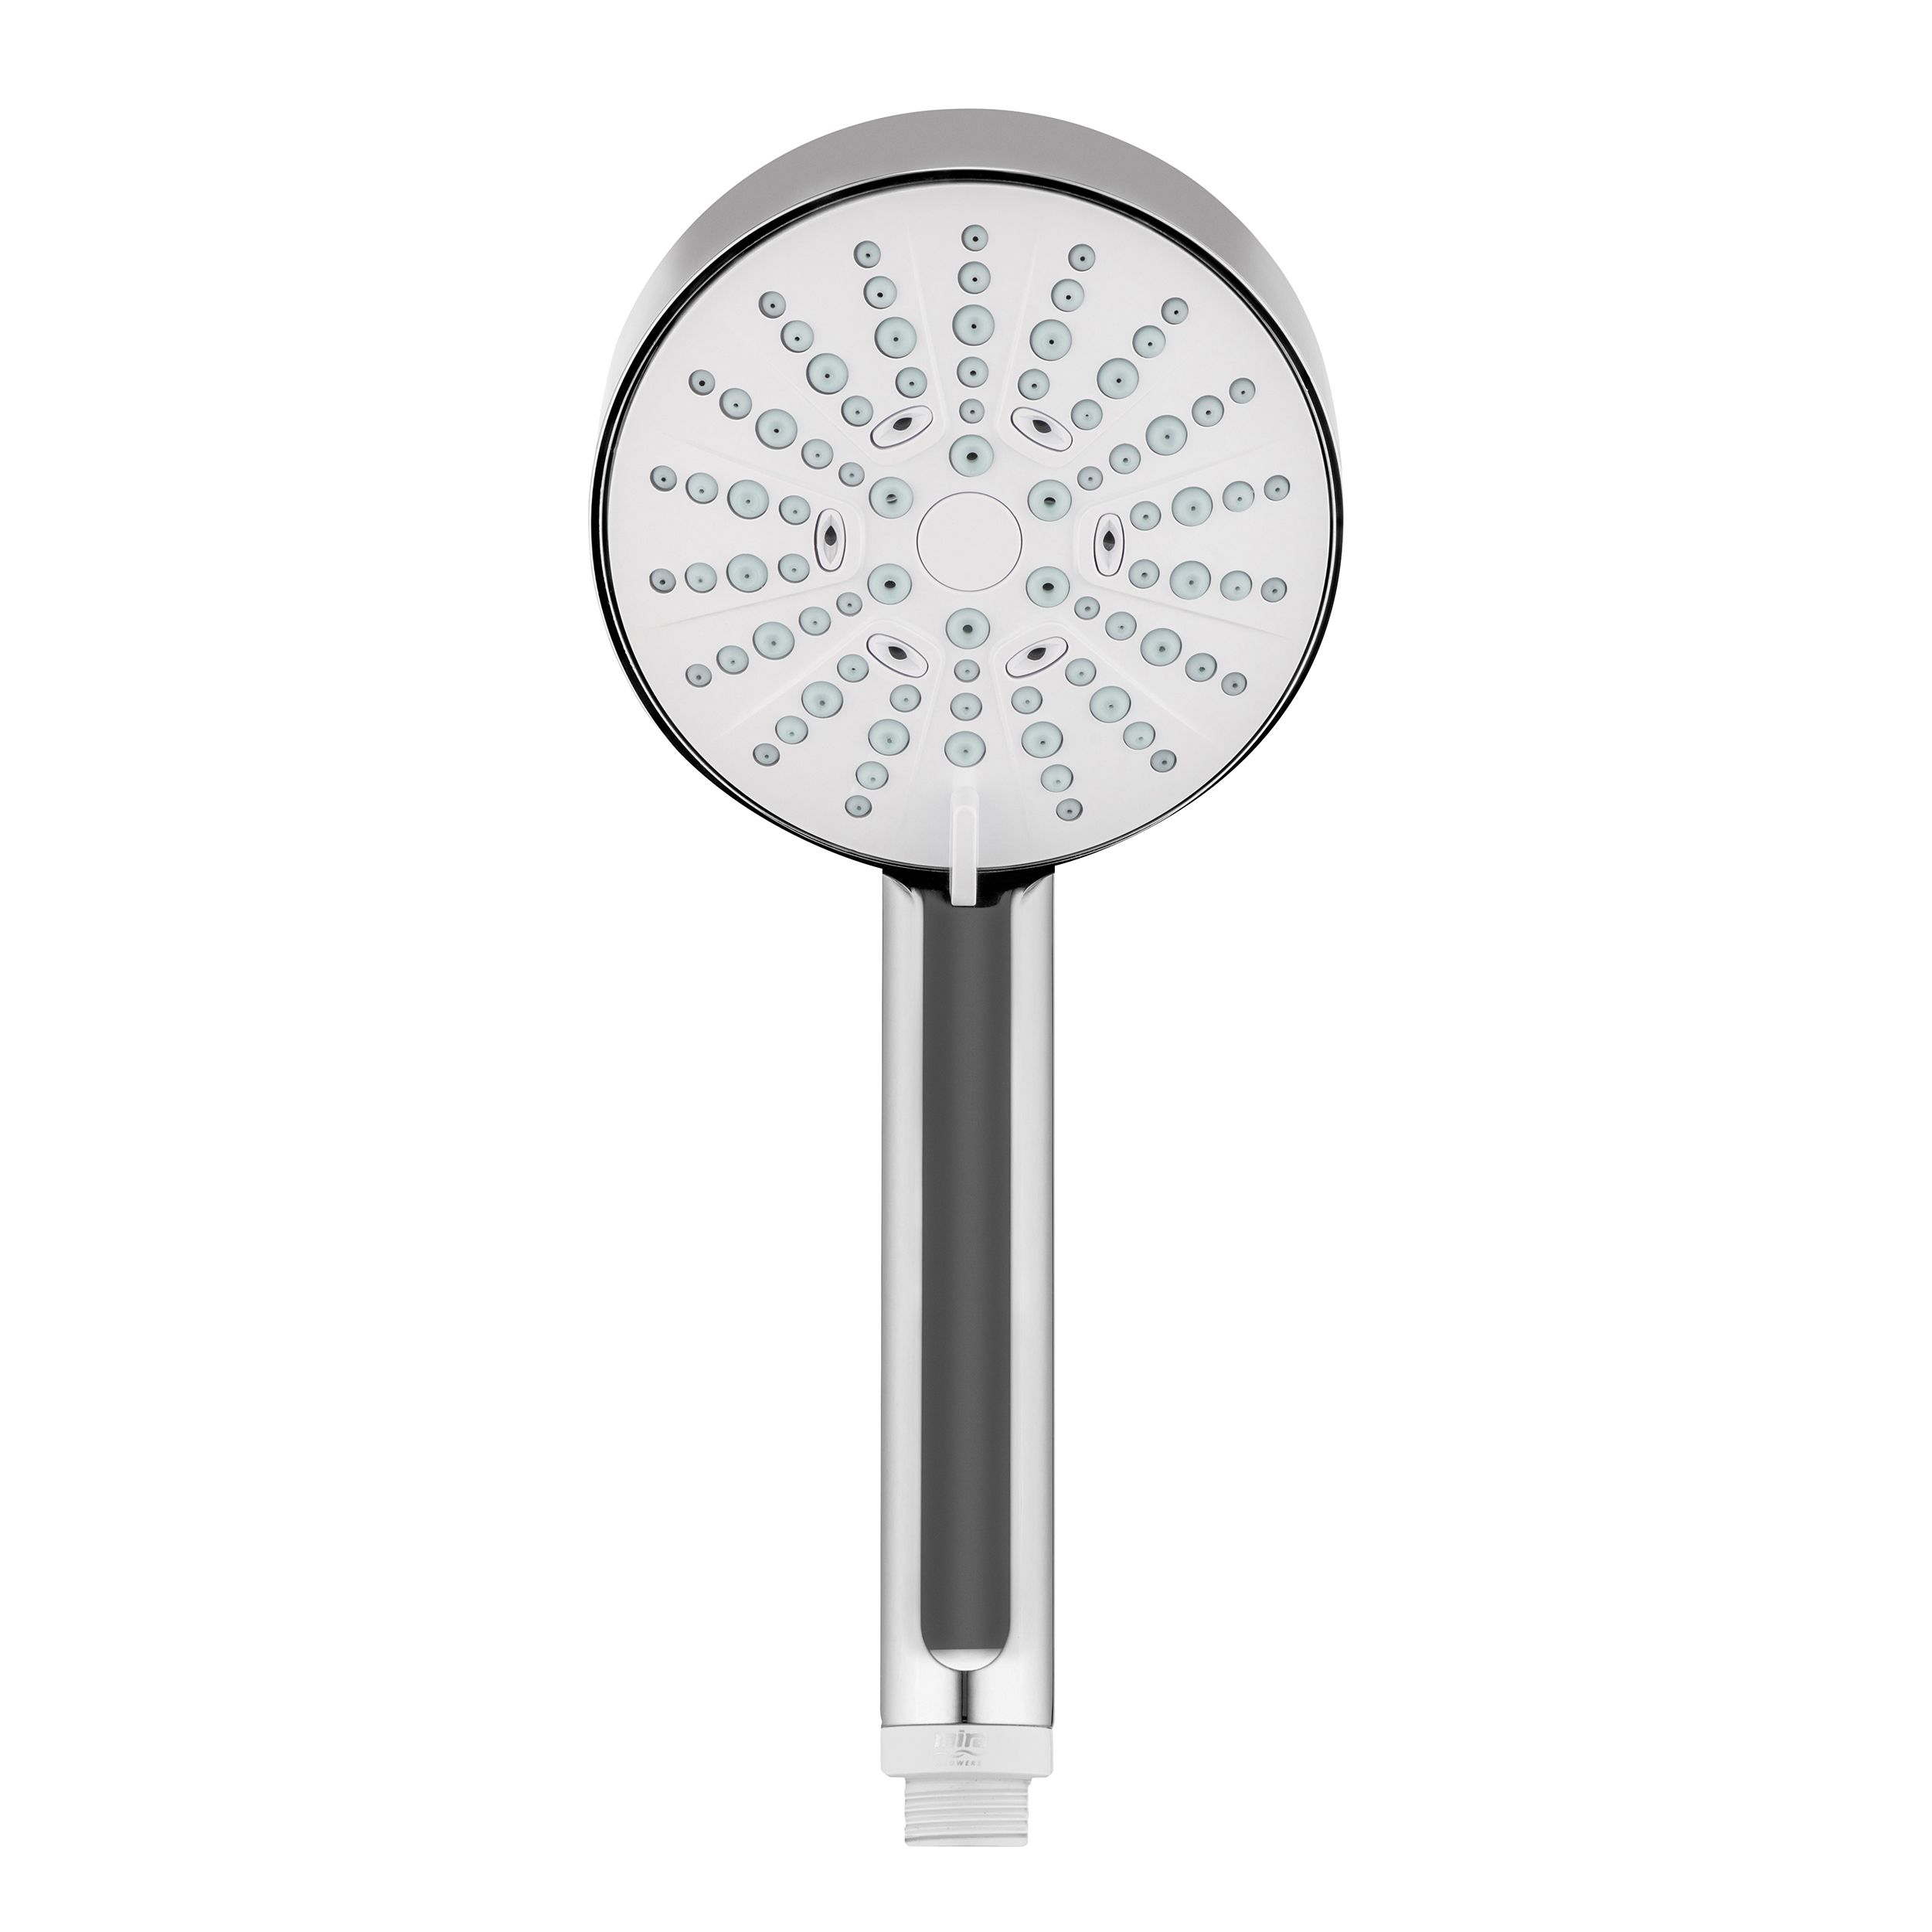 Mira Sport Max Airboost White Electric Shower, 9kW